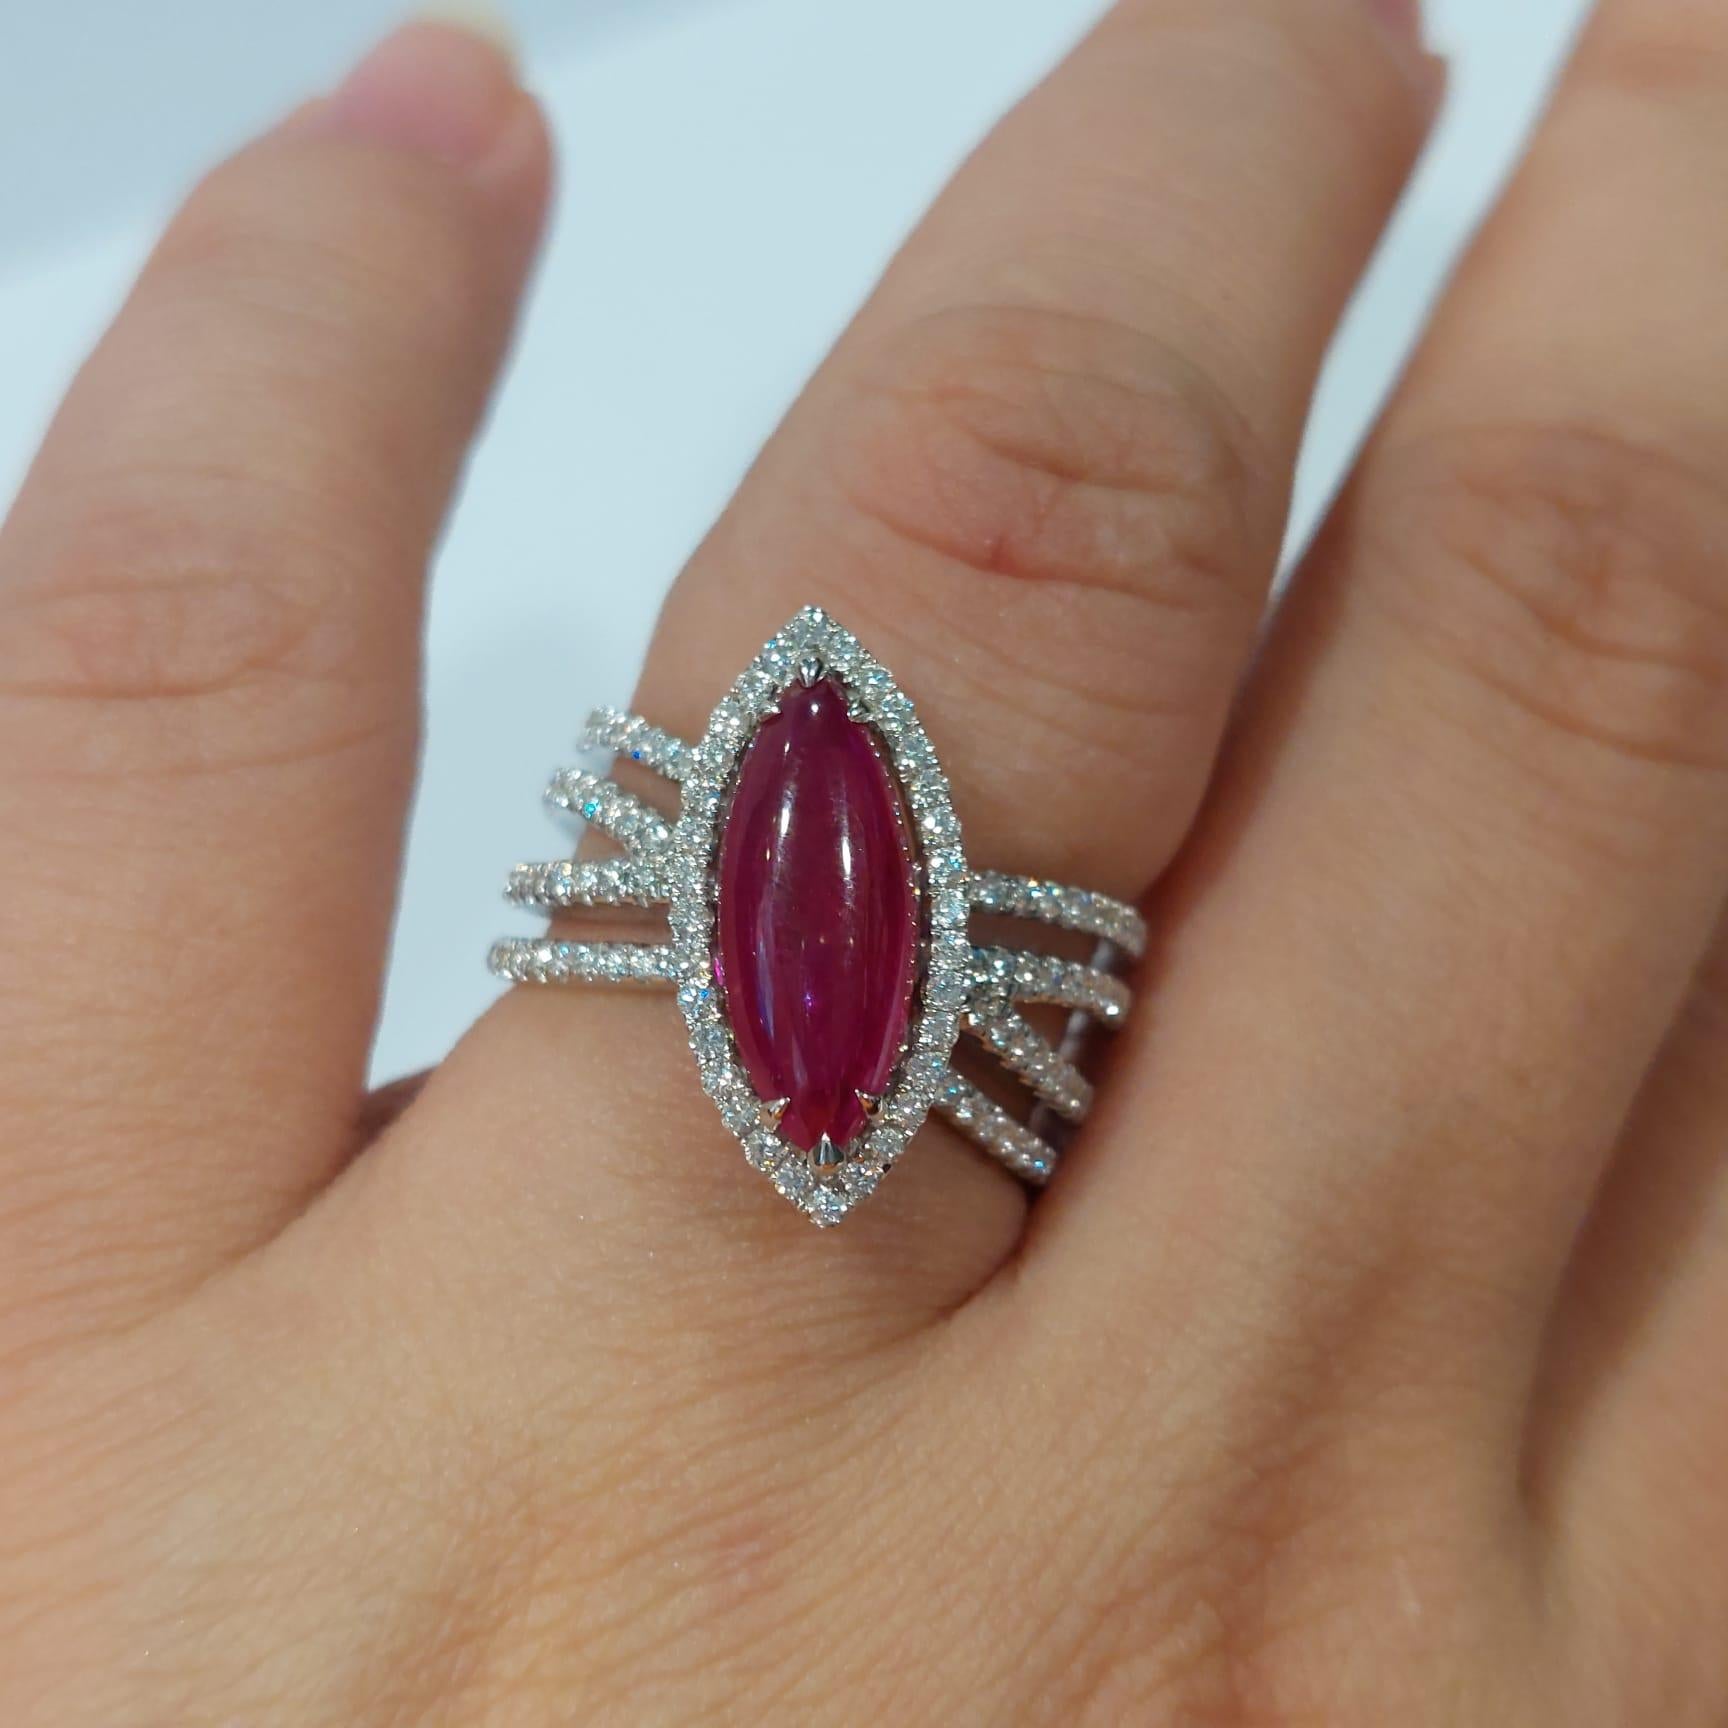 Brilliant Cut Gilin 18k White Gold Diamond Ring with Ruby For Sale